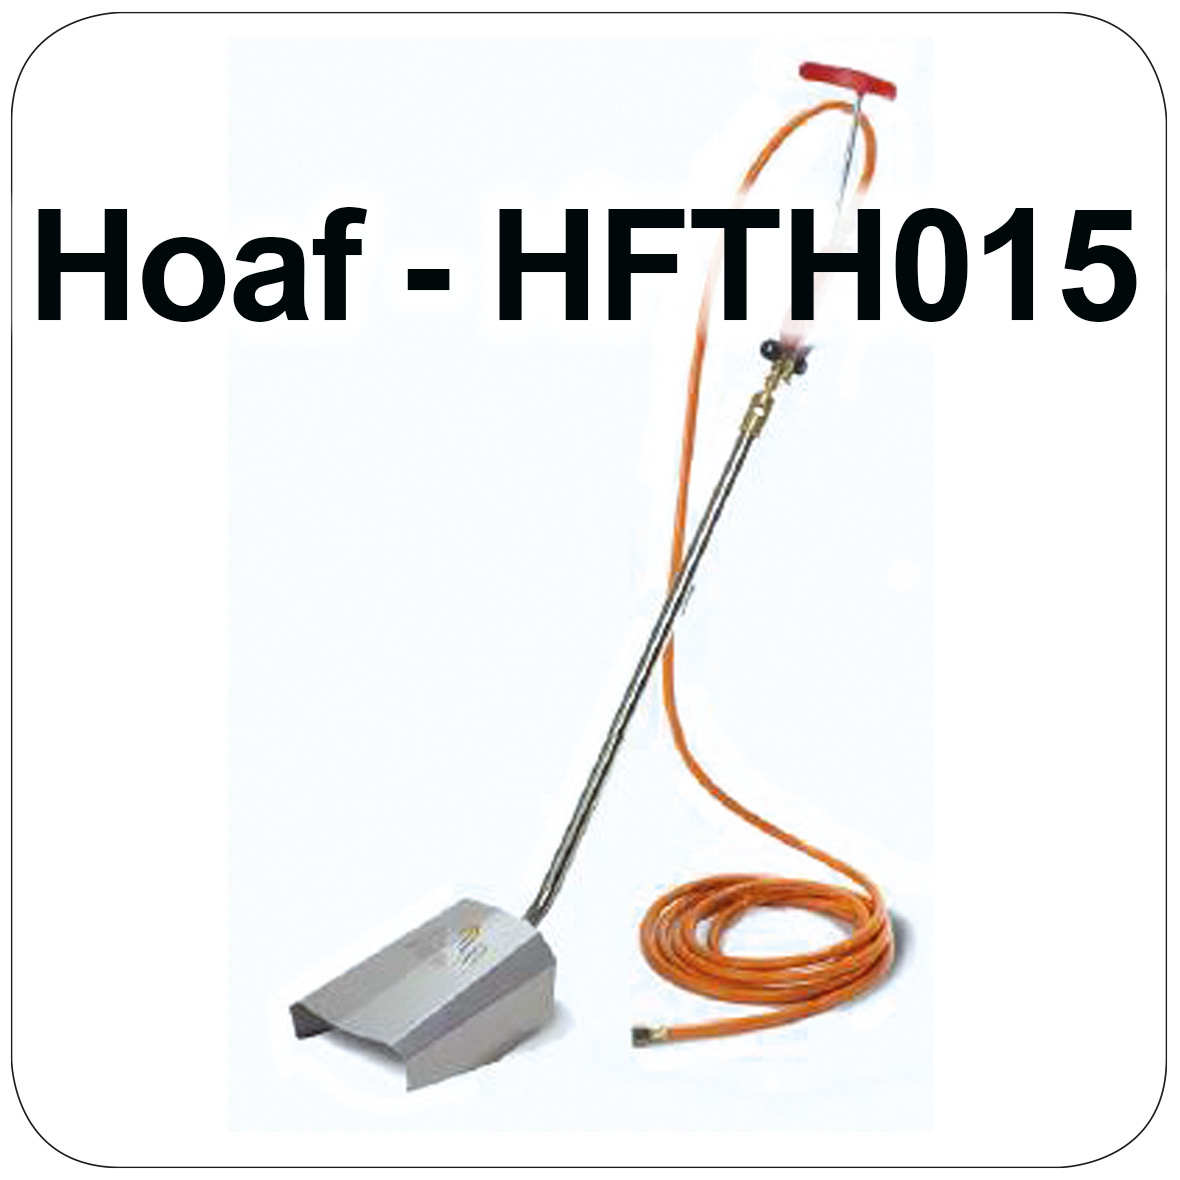 Hoaf ThermHit 15 - Thermal weed lance